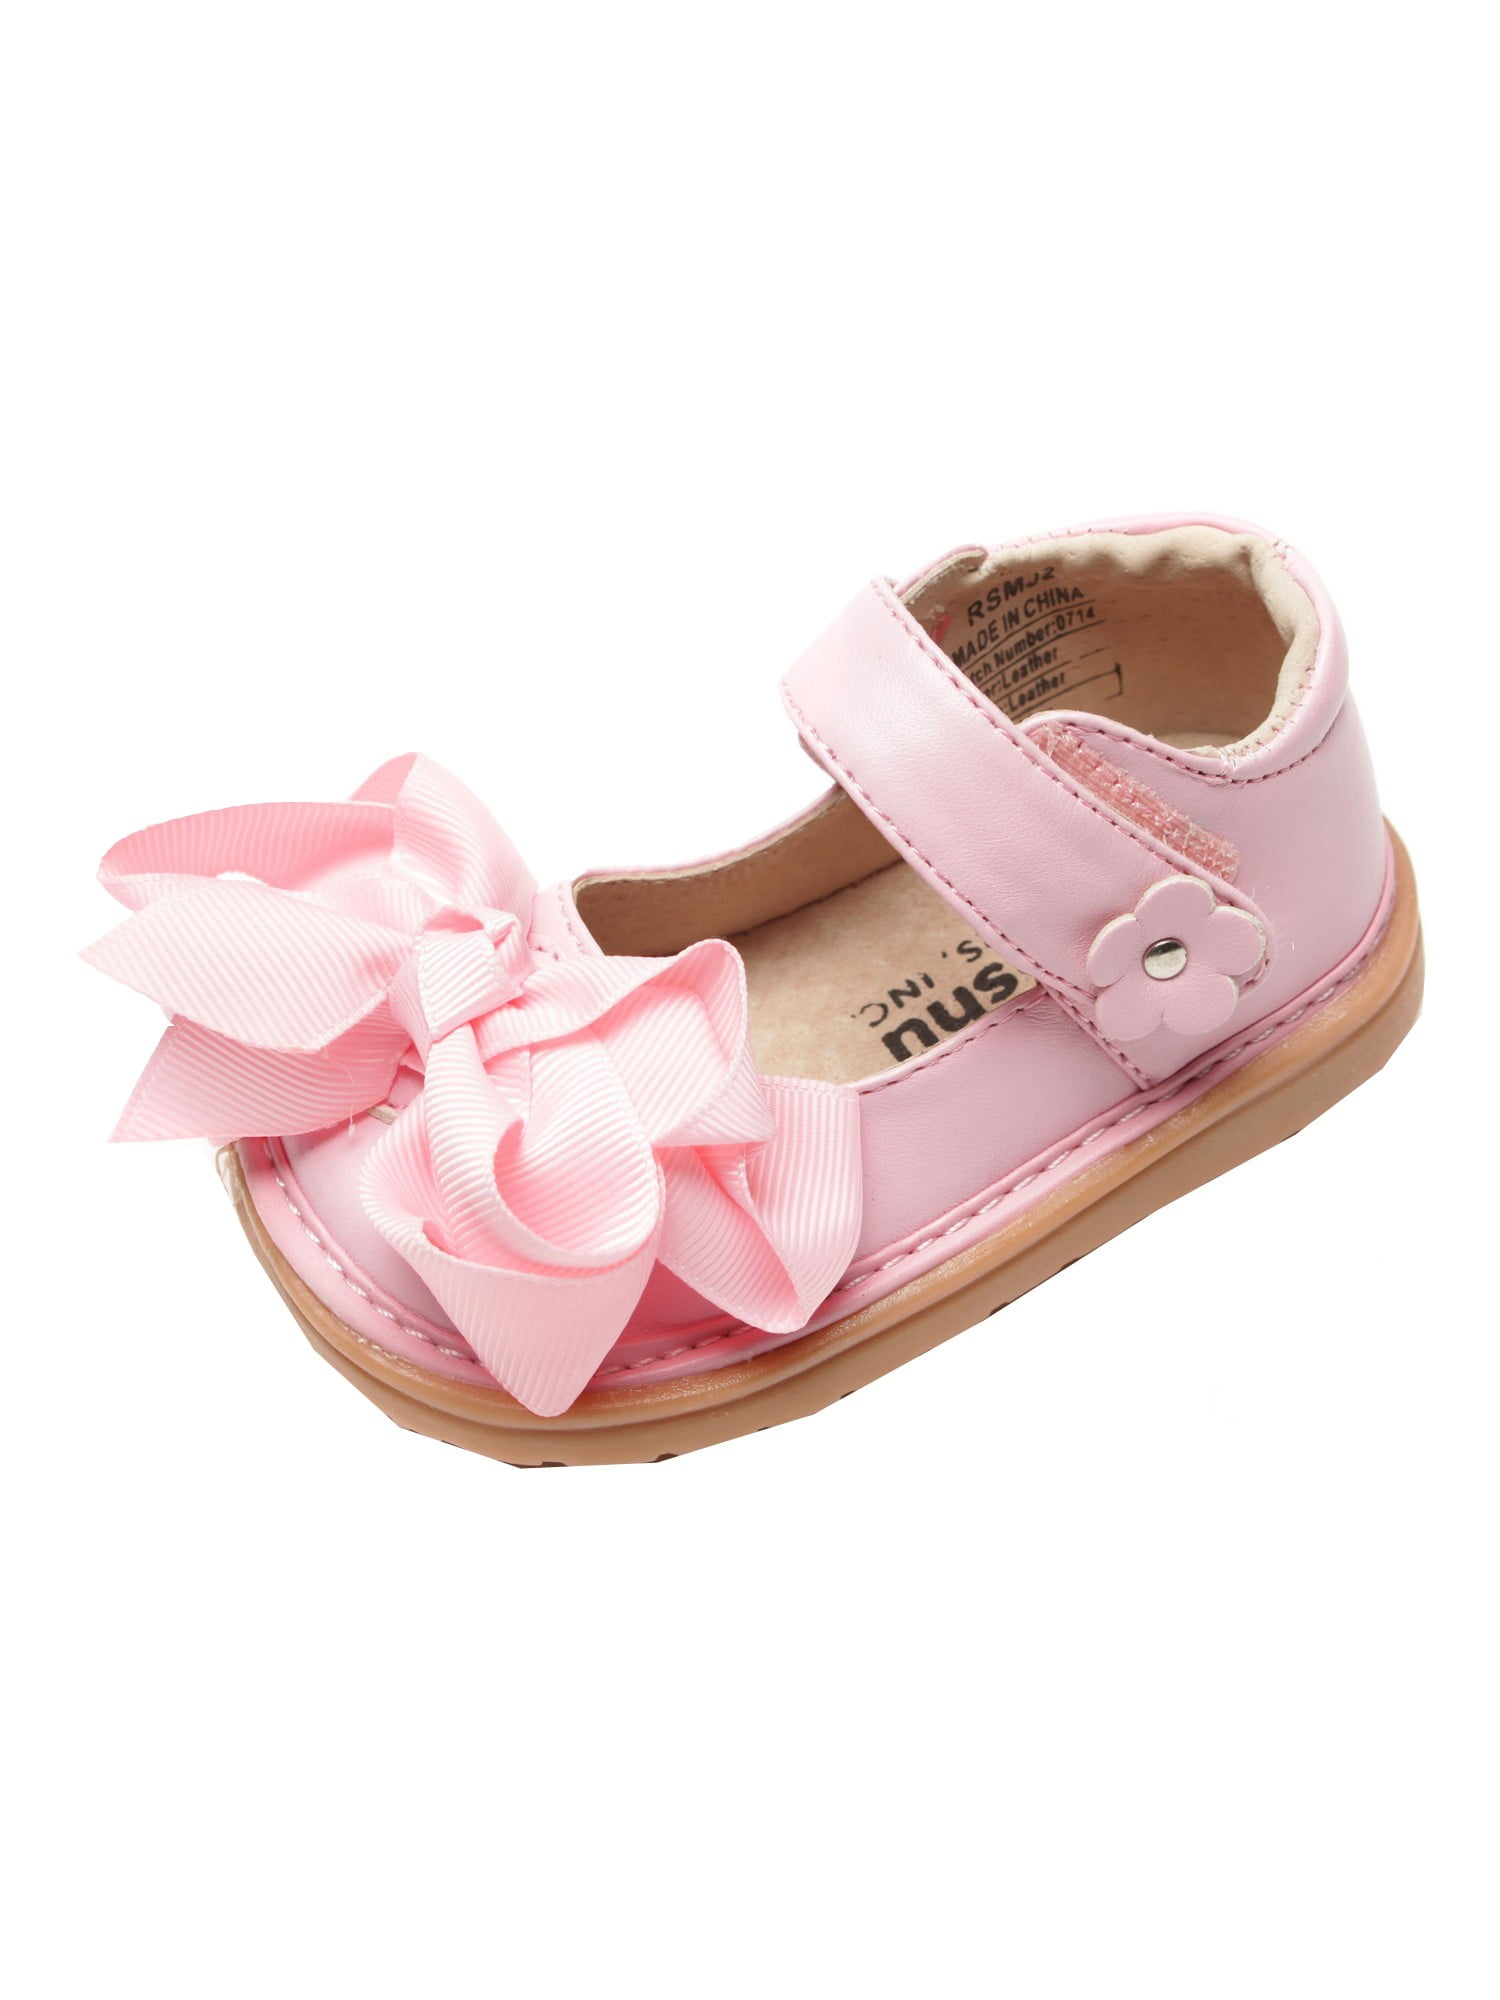 girls pink mary janes